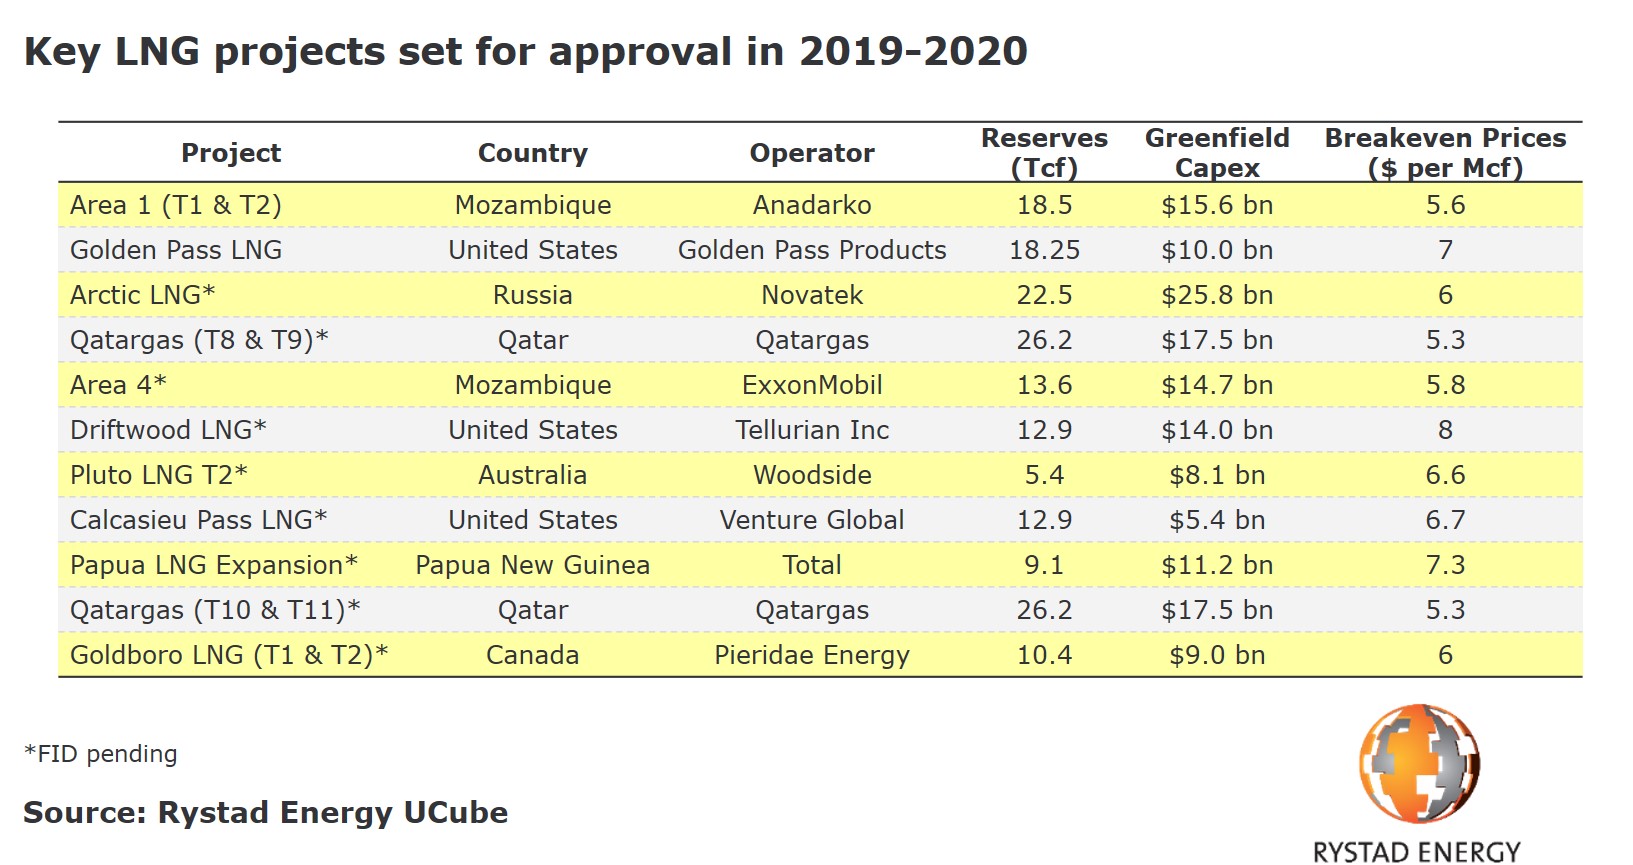 20190627_PR Chart LNG projects for approval 2019-2020.JPG